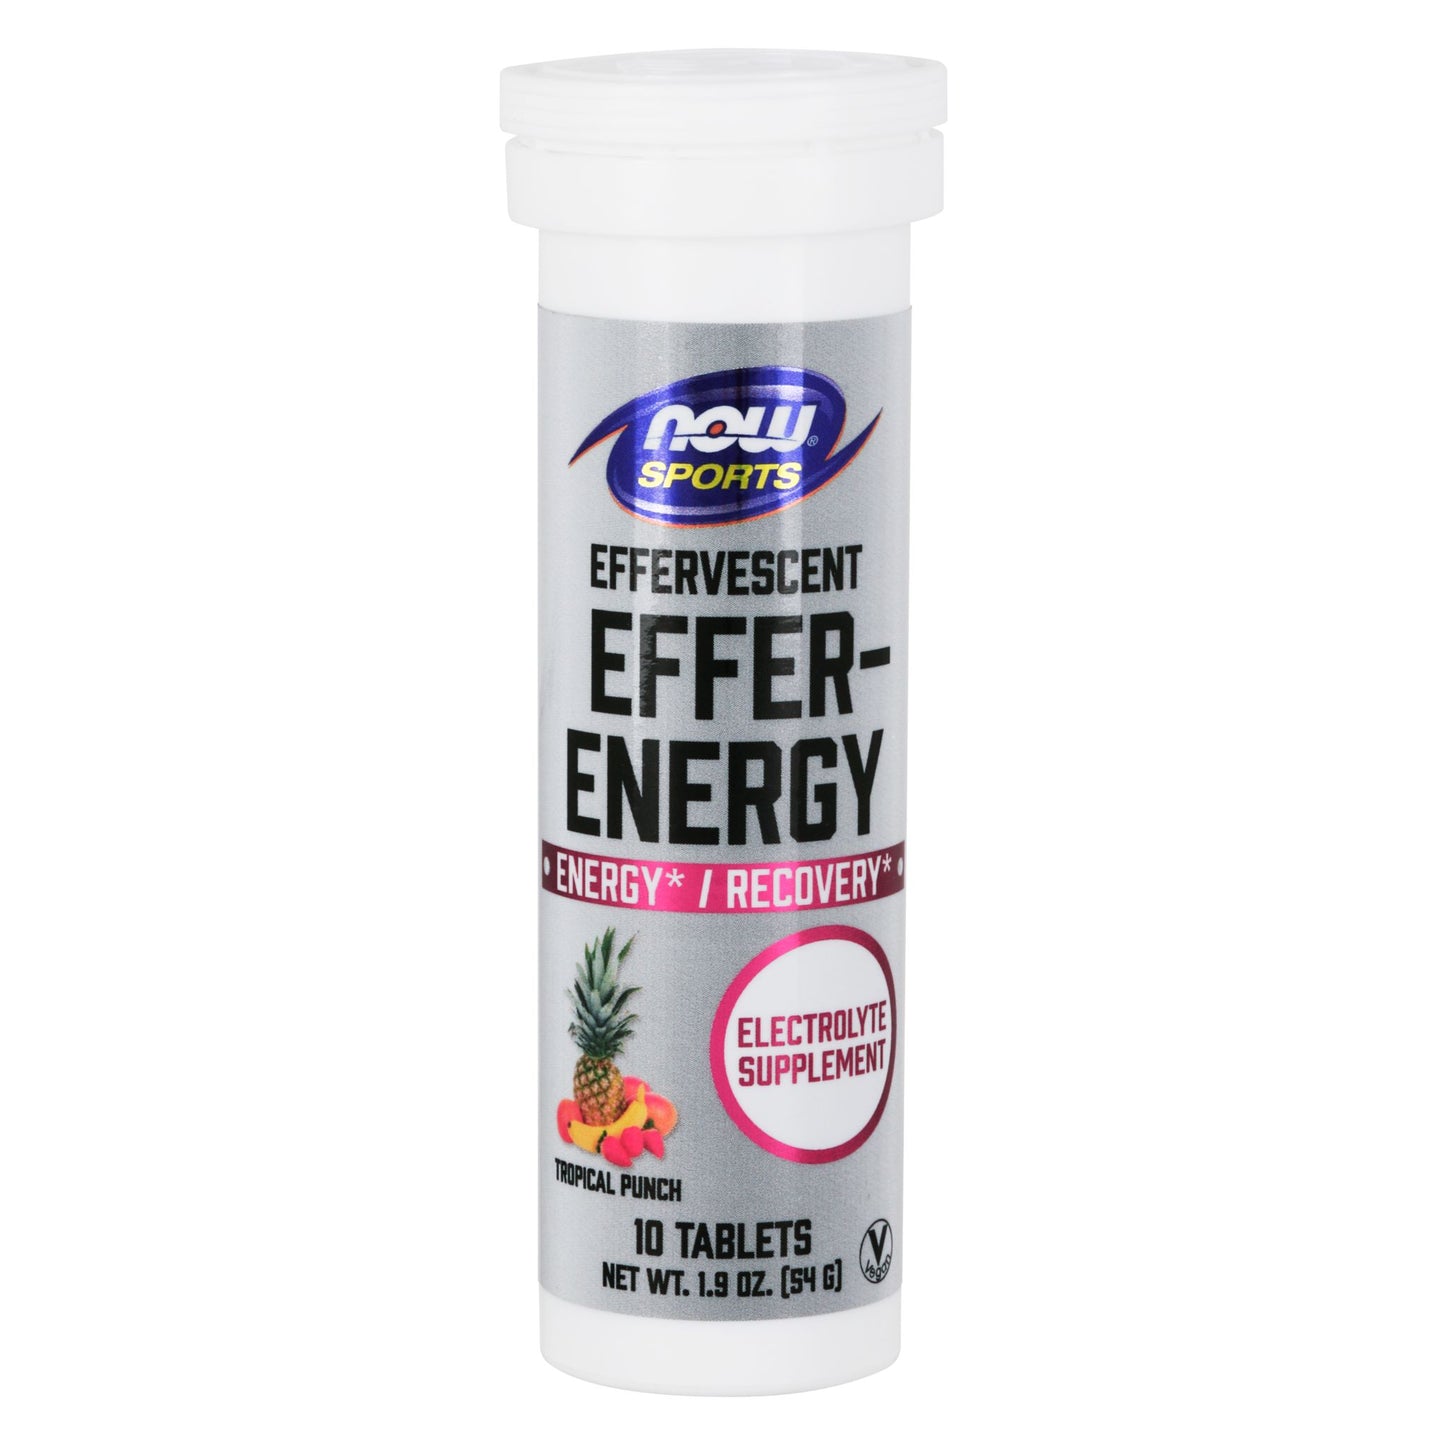 NOW Foods Effer-Hydrate Electrolyte Supplement